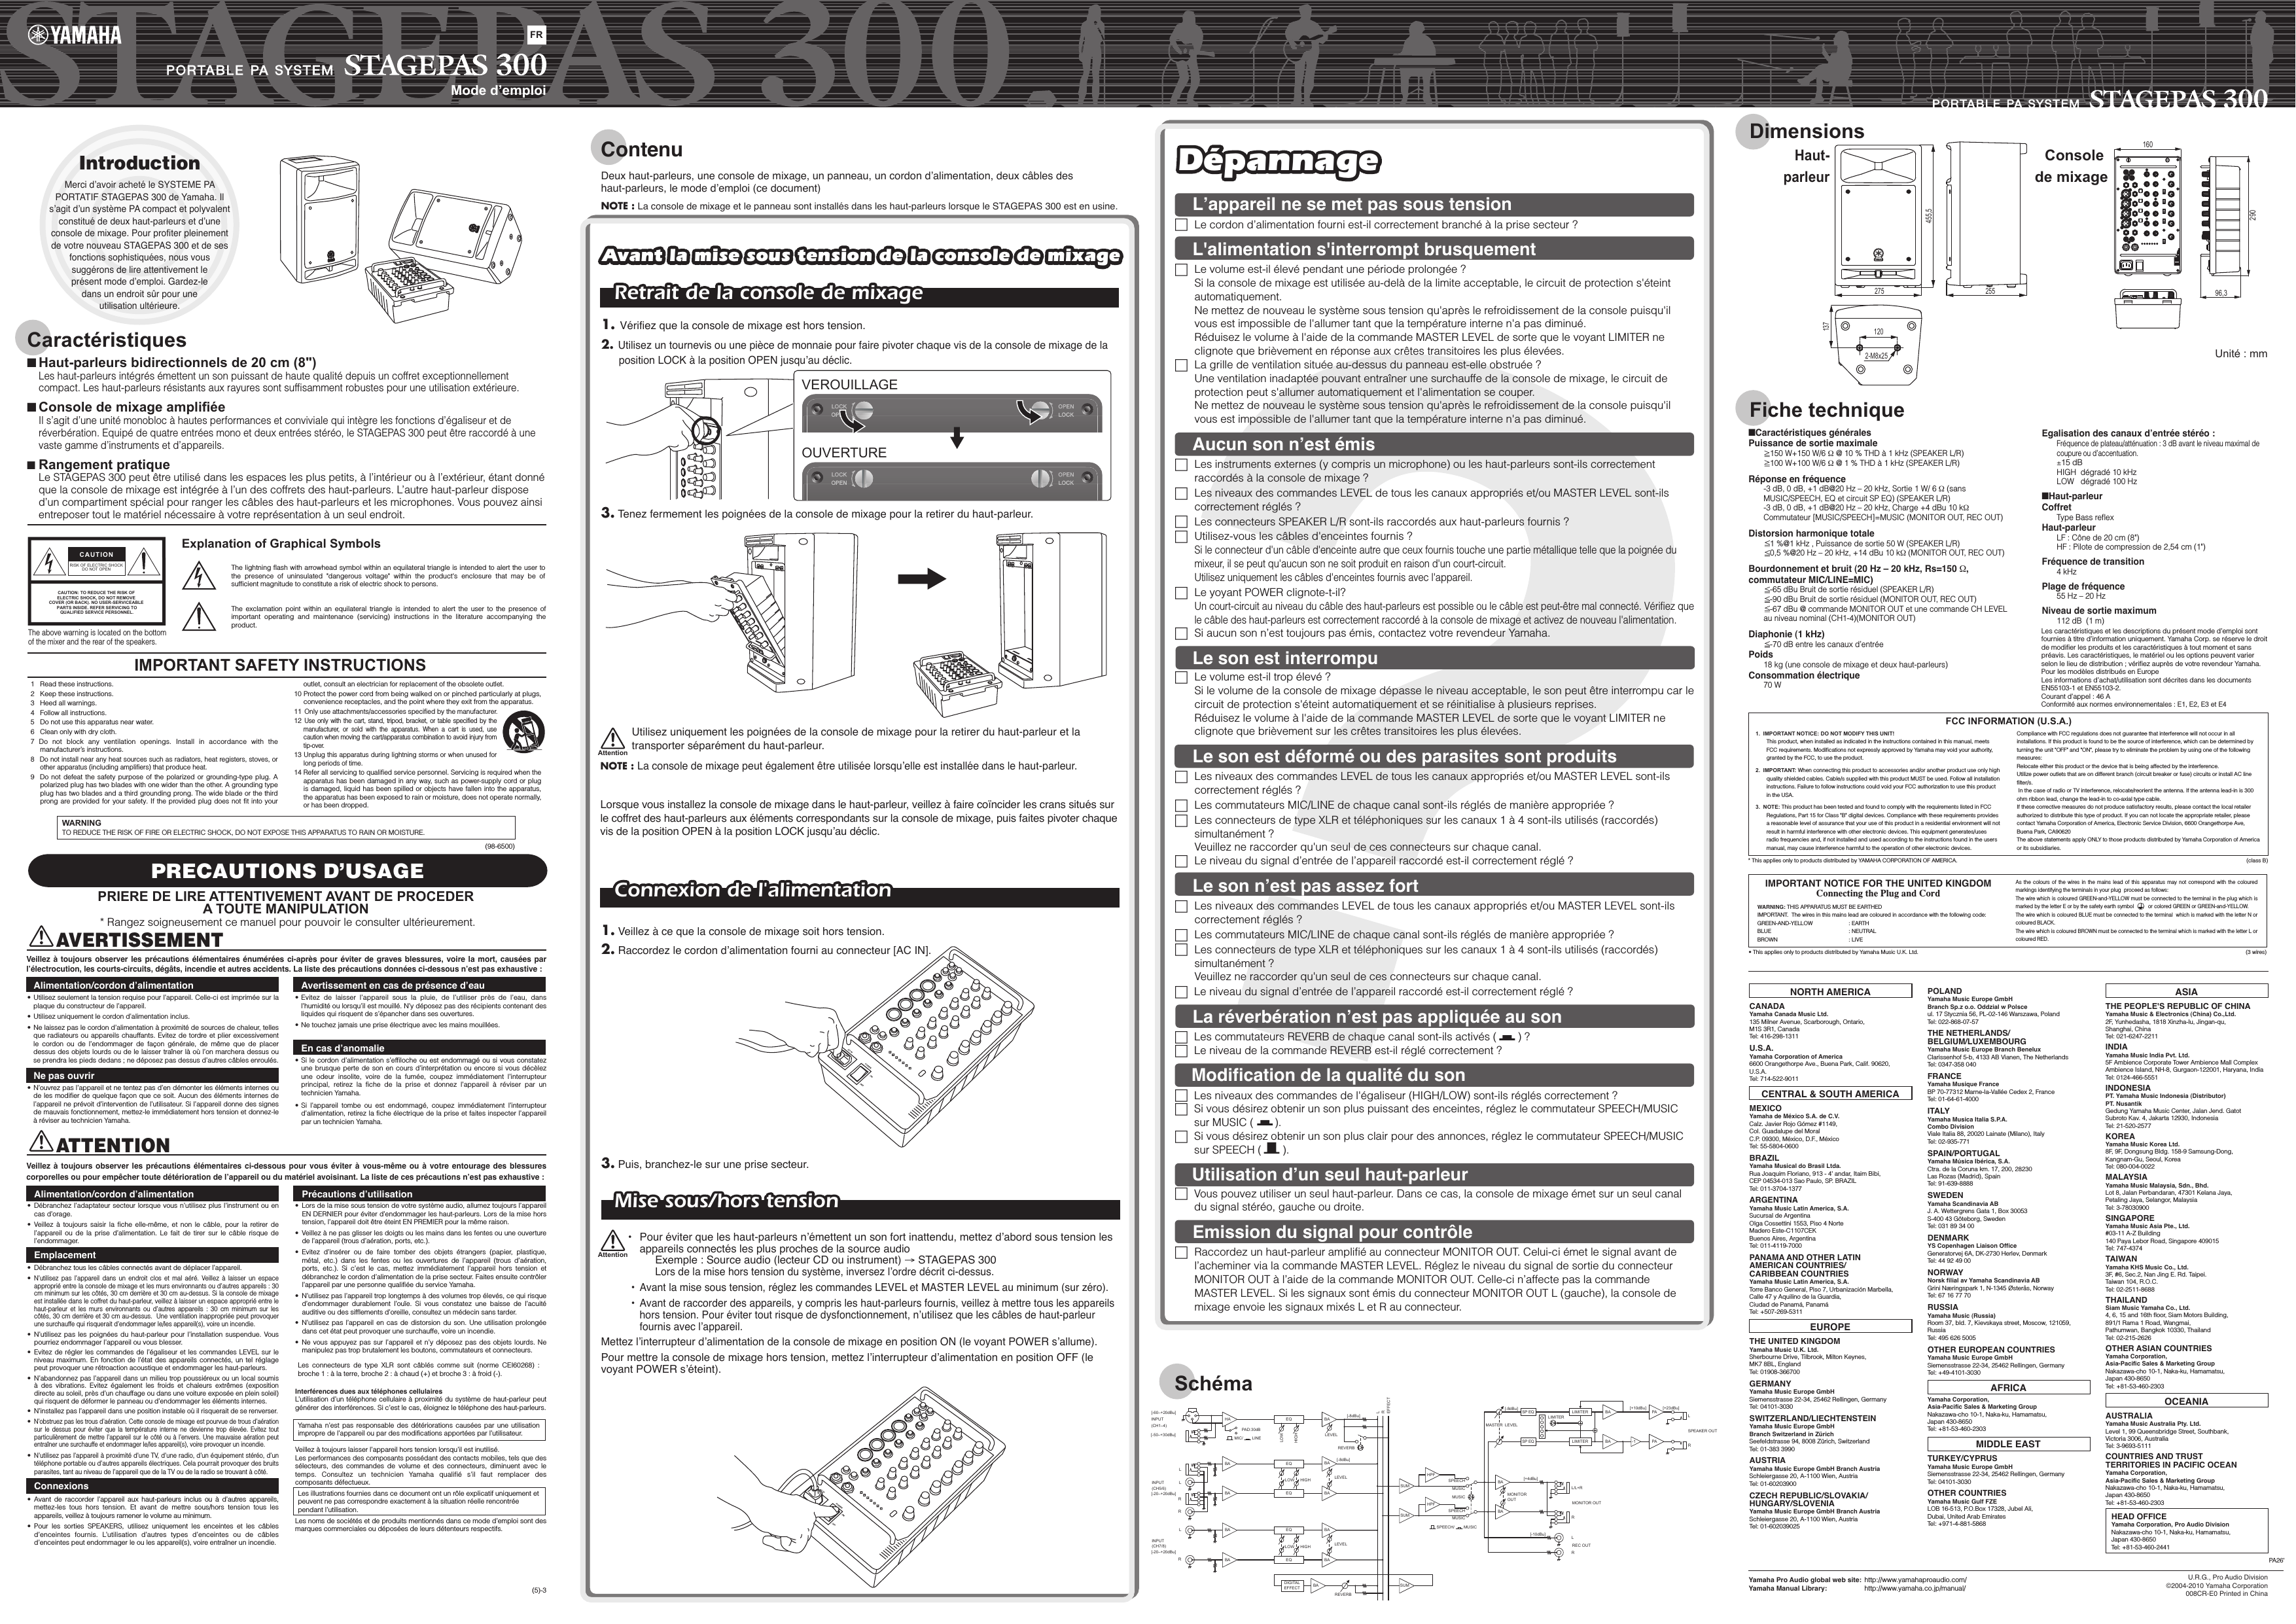 Page 1 of 2 - Yamaha STAGEPAS 300 Owner's Manual Stagepas300 Fr Om E0